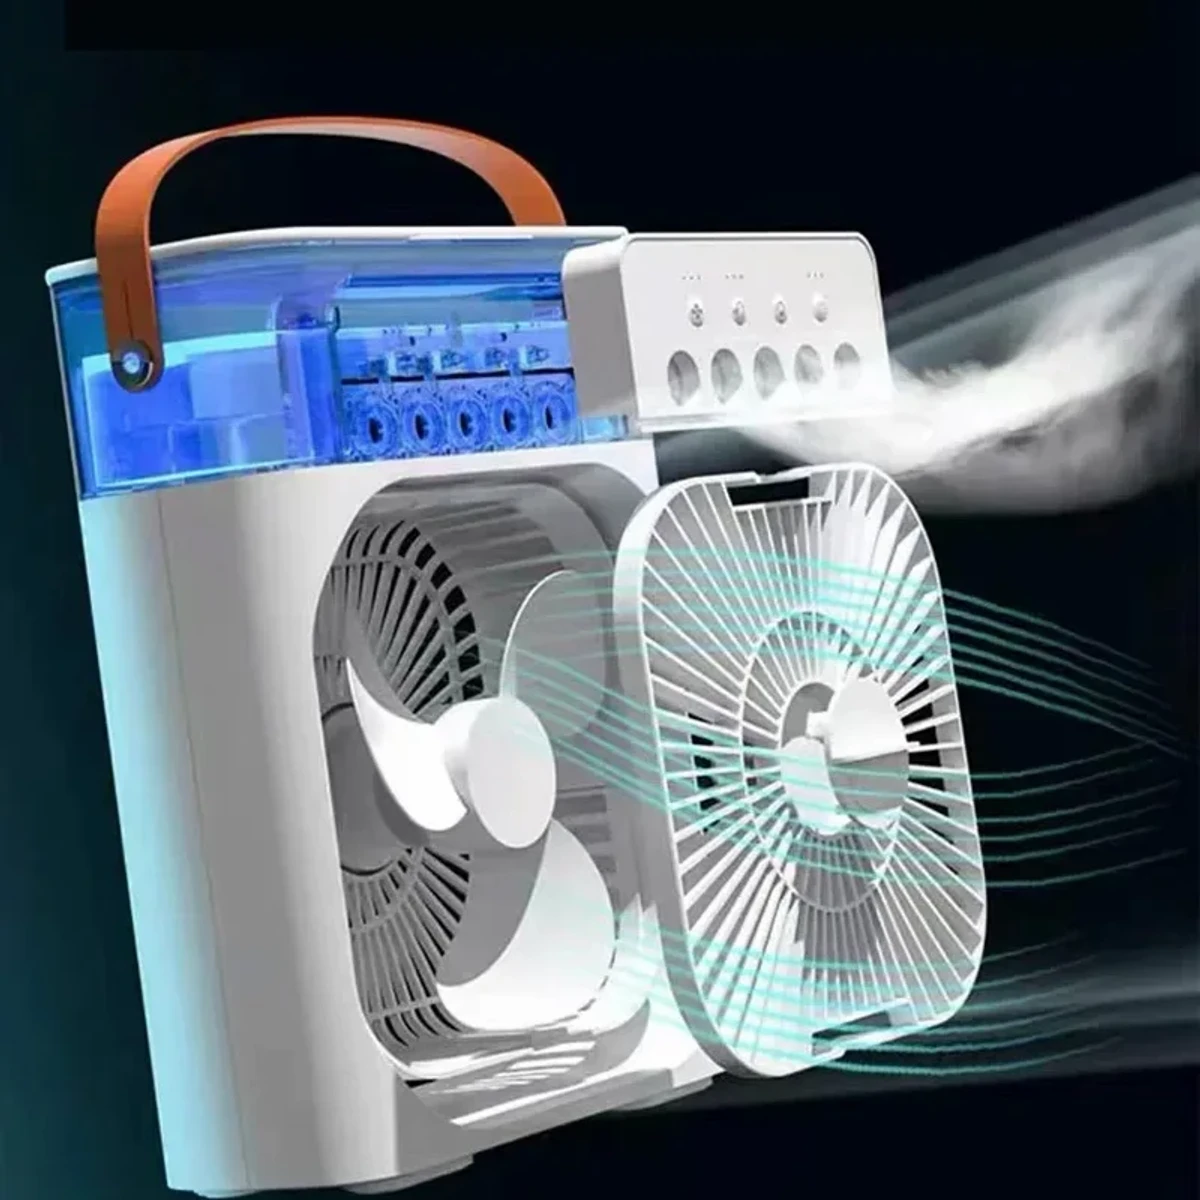 3 In 1 Fan Air Conditioner Household Small Air Cooler LED Night Light Portable Humidifier Air Adjustment Fan